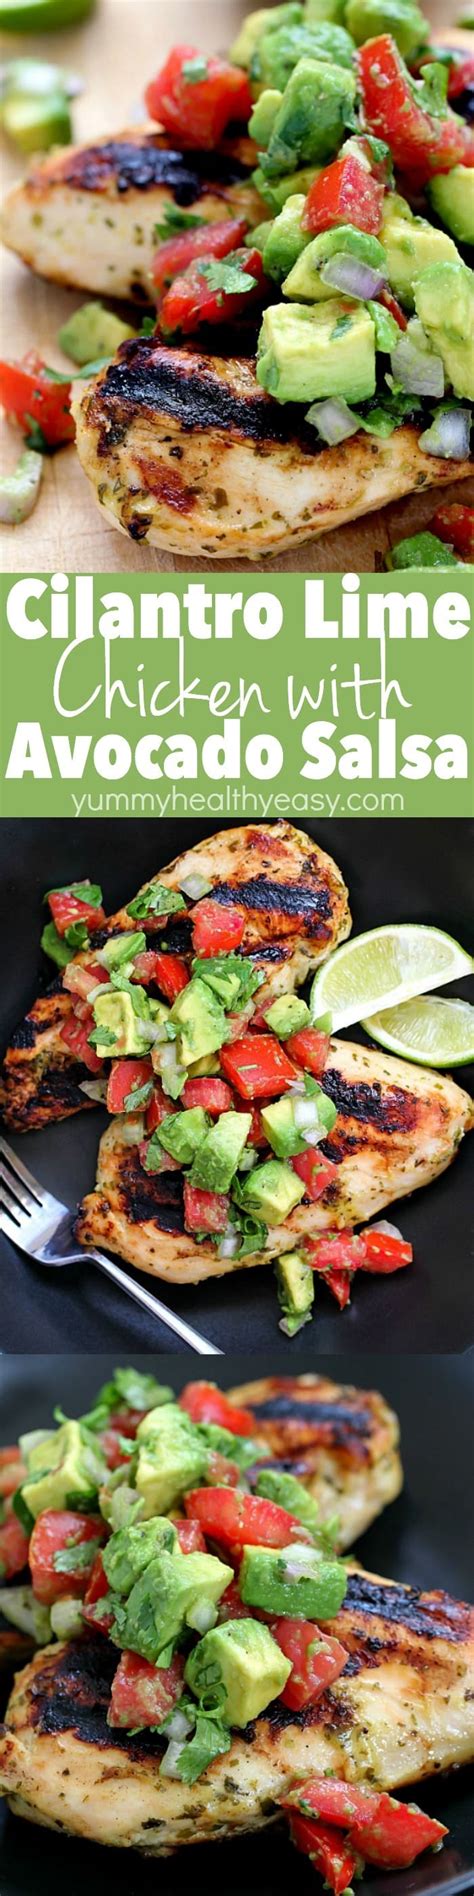 Cilantro lime chicken with avocado salsa — aka one of the ultimate ways to prepare chicken breasts! Cilantro Lime Chicken with Avocado Salsa - Yummy Healthy Easy